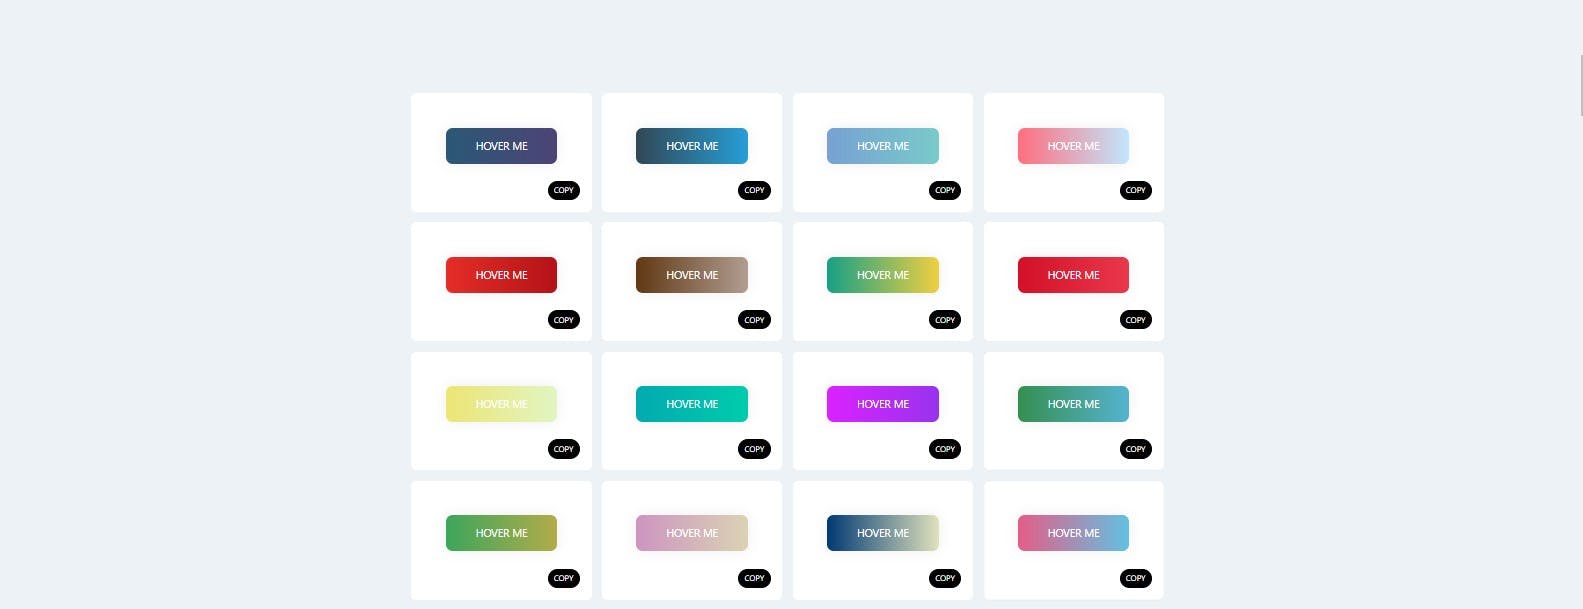 Gradient Buttons- Gradient buttons with hover effects